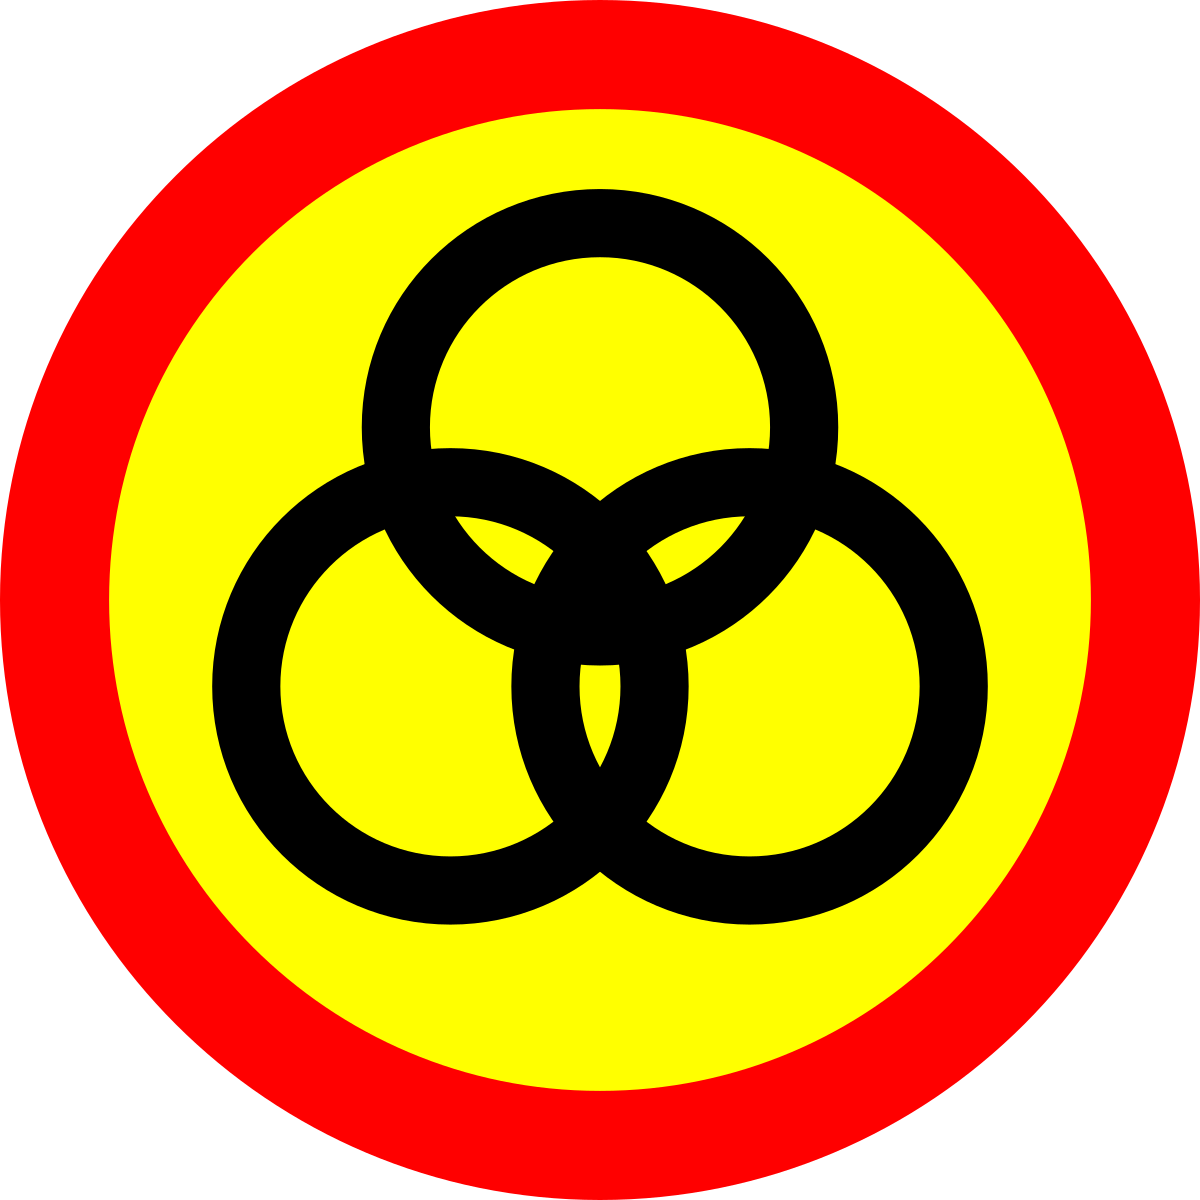 A Yellow And Red Circle With Black Circles In The Middle